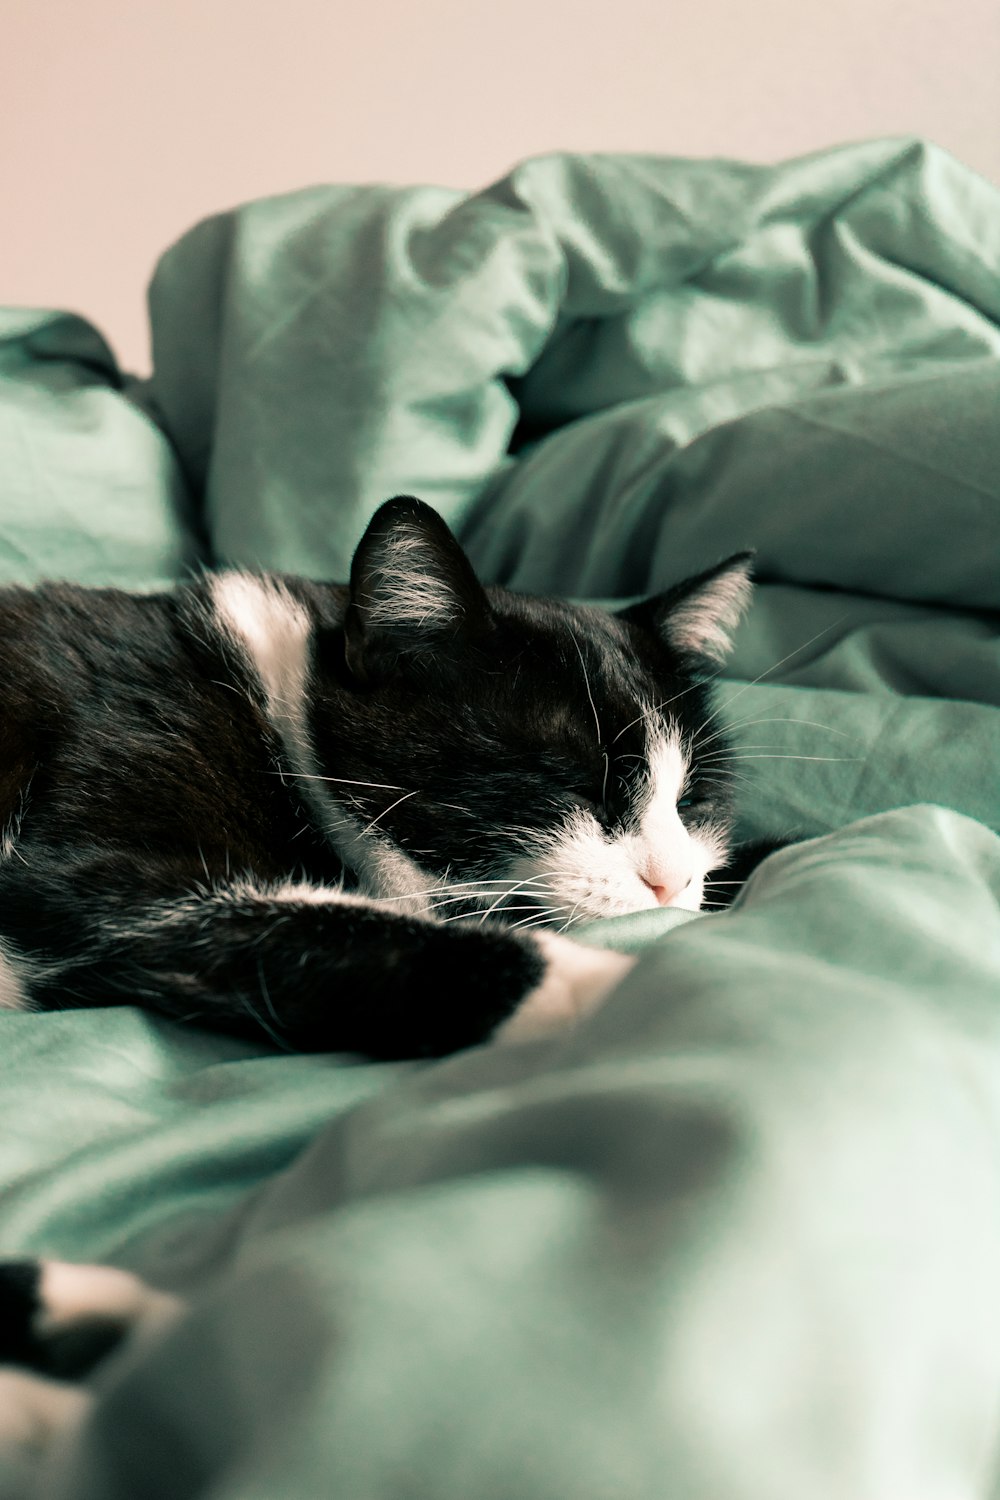 black and white cat sleeping on green textile